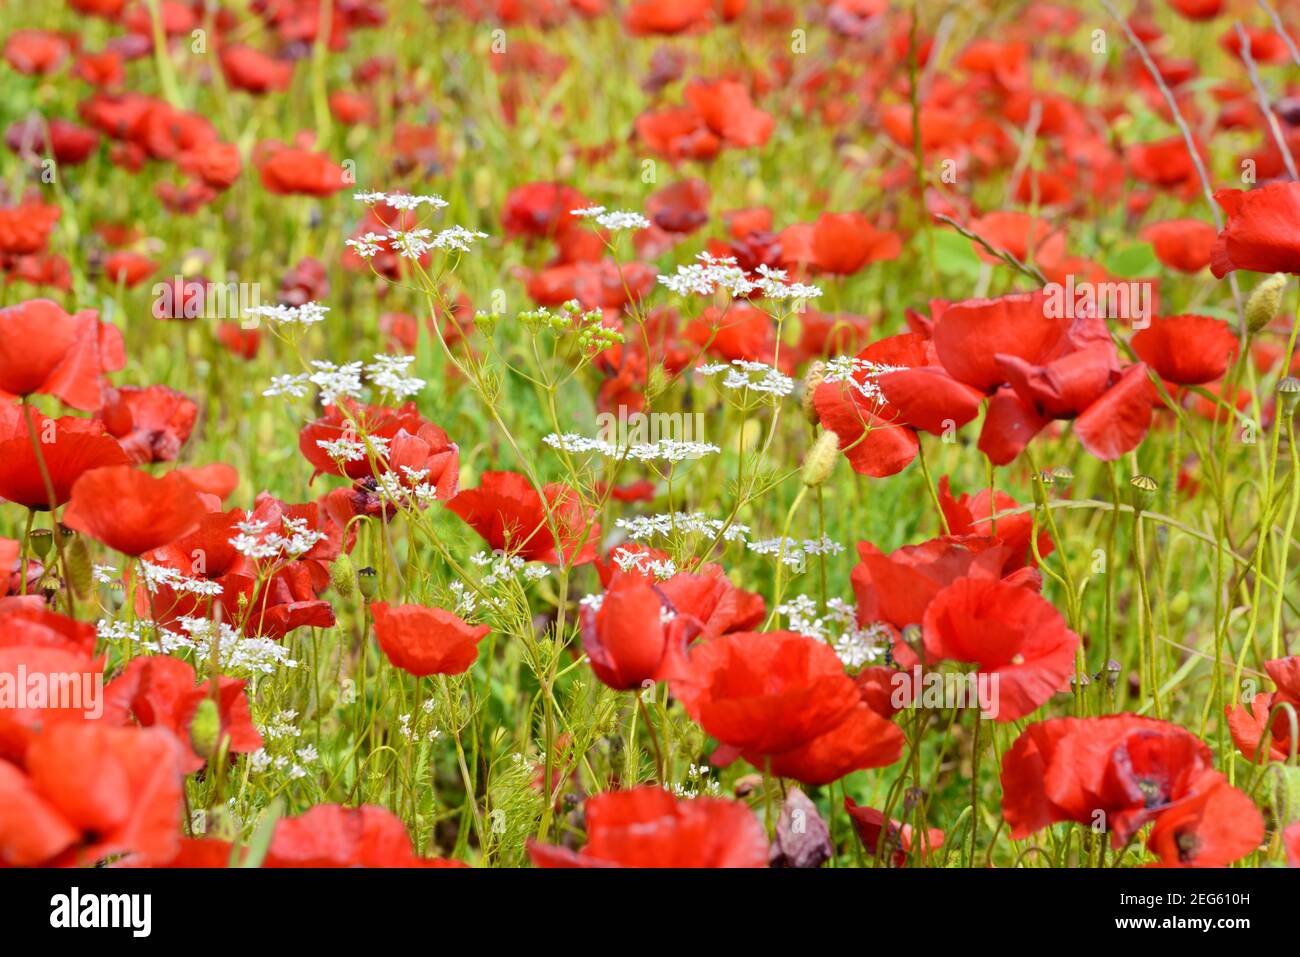 Common Poppies, Poppy Field, Papaver somniferum, & Cow Parsley, Anthriscus sylvestris, on Valensole Plateau Provence France Stock Photo